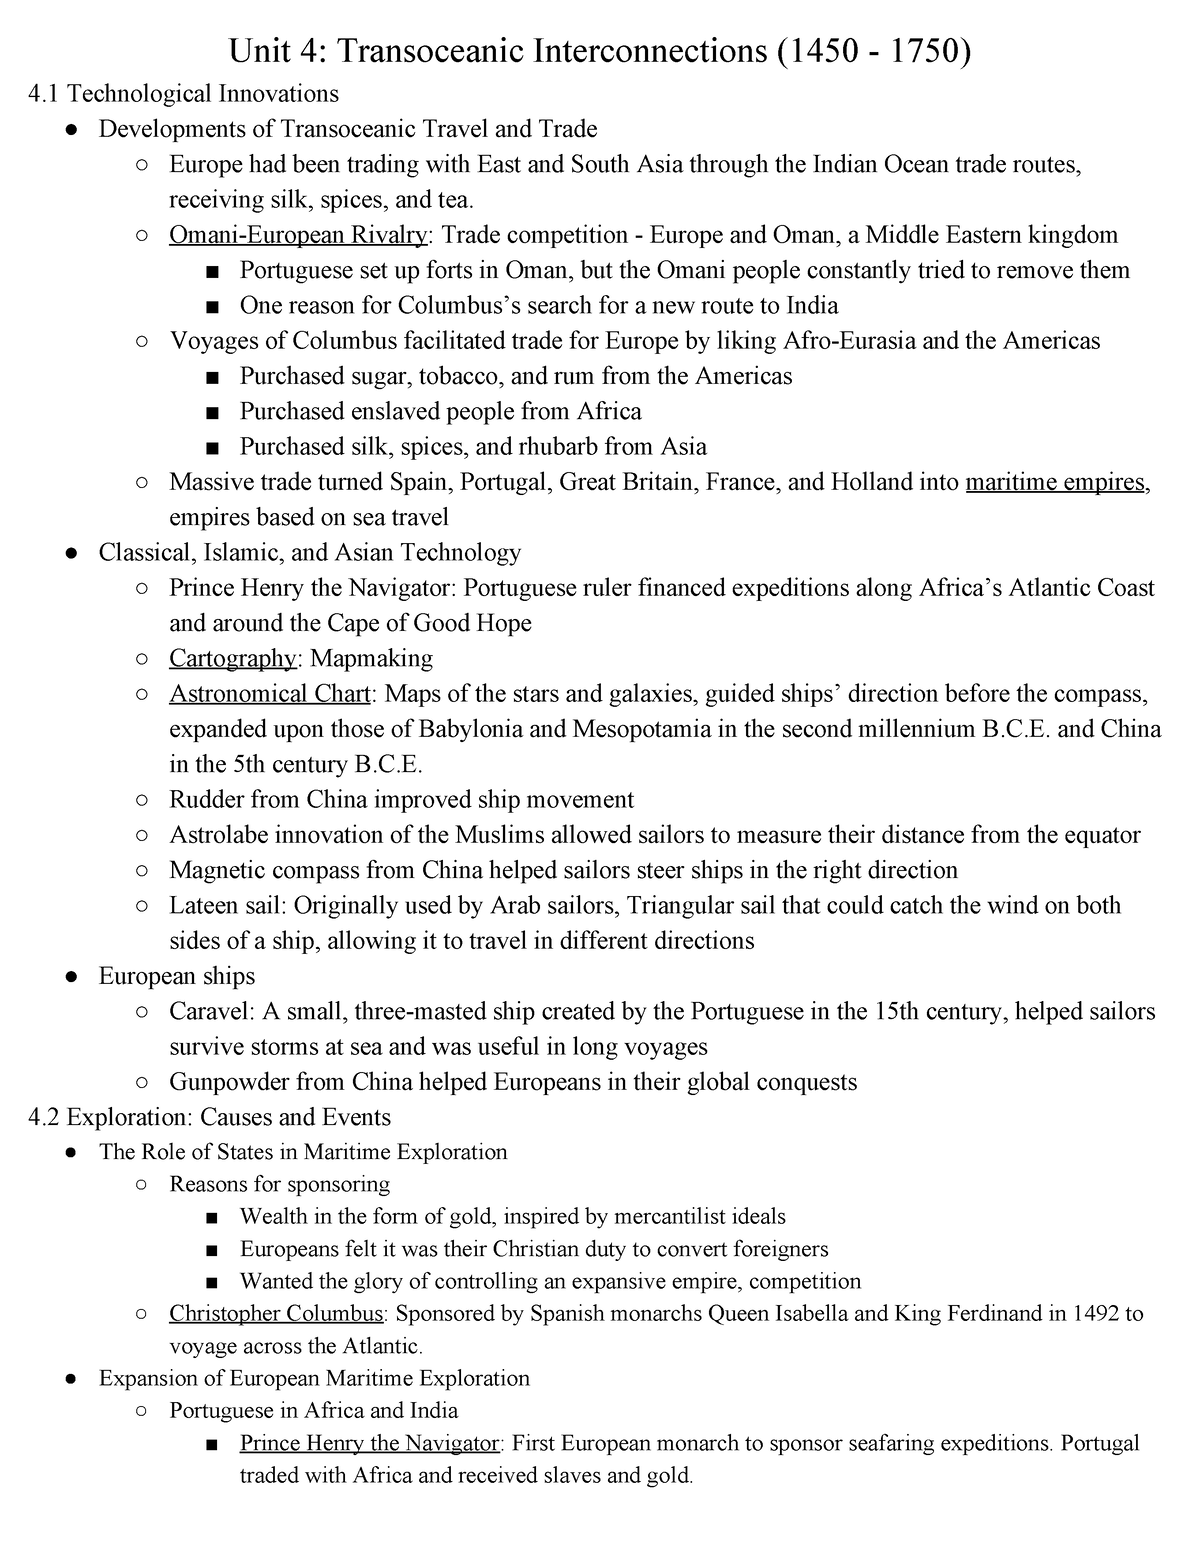 4 AP World History Review Unit 4 Transoceanic Interconnections (1450